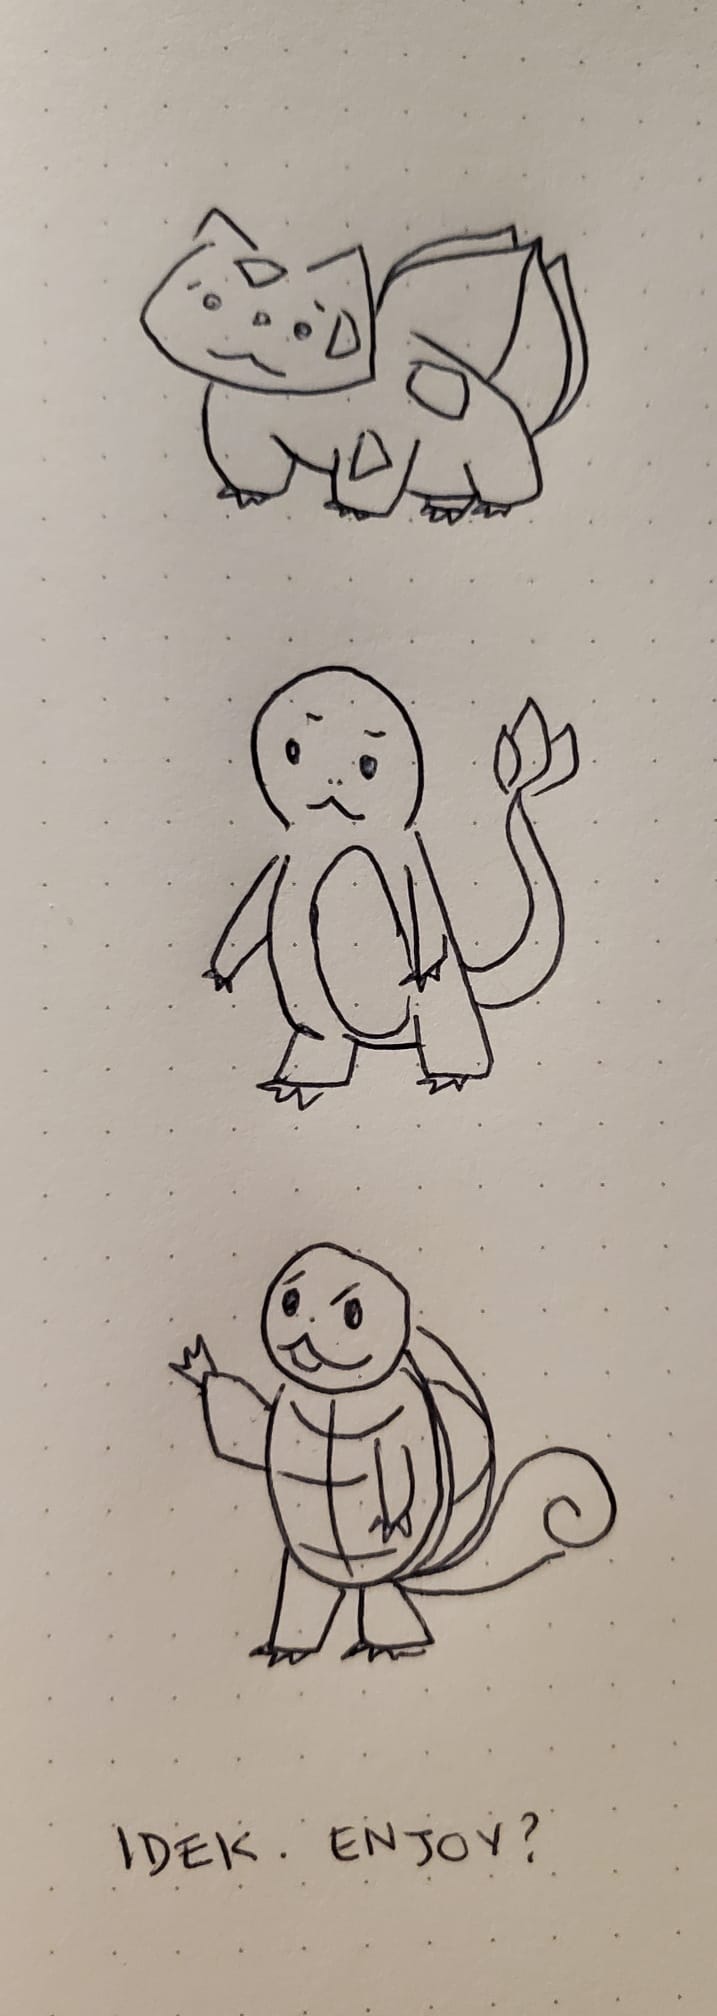 A doodle of Pokemon